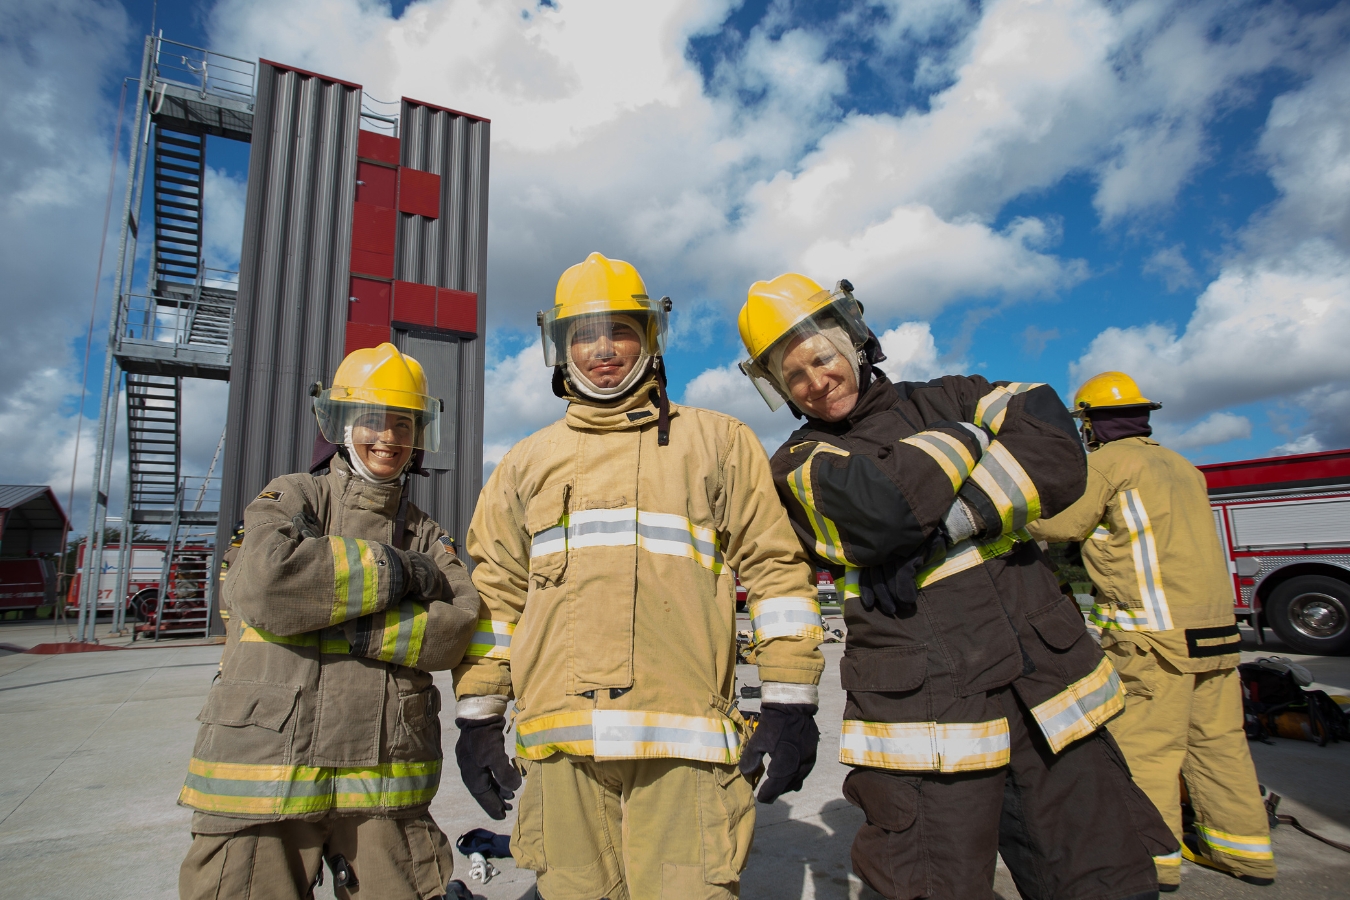 Group photo of fire fighter student recruits posing in front of the fire academy tower during a group activity